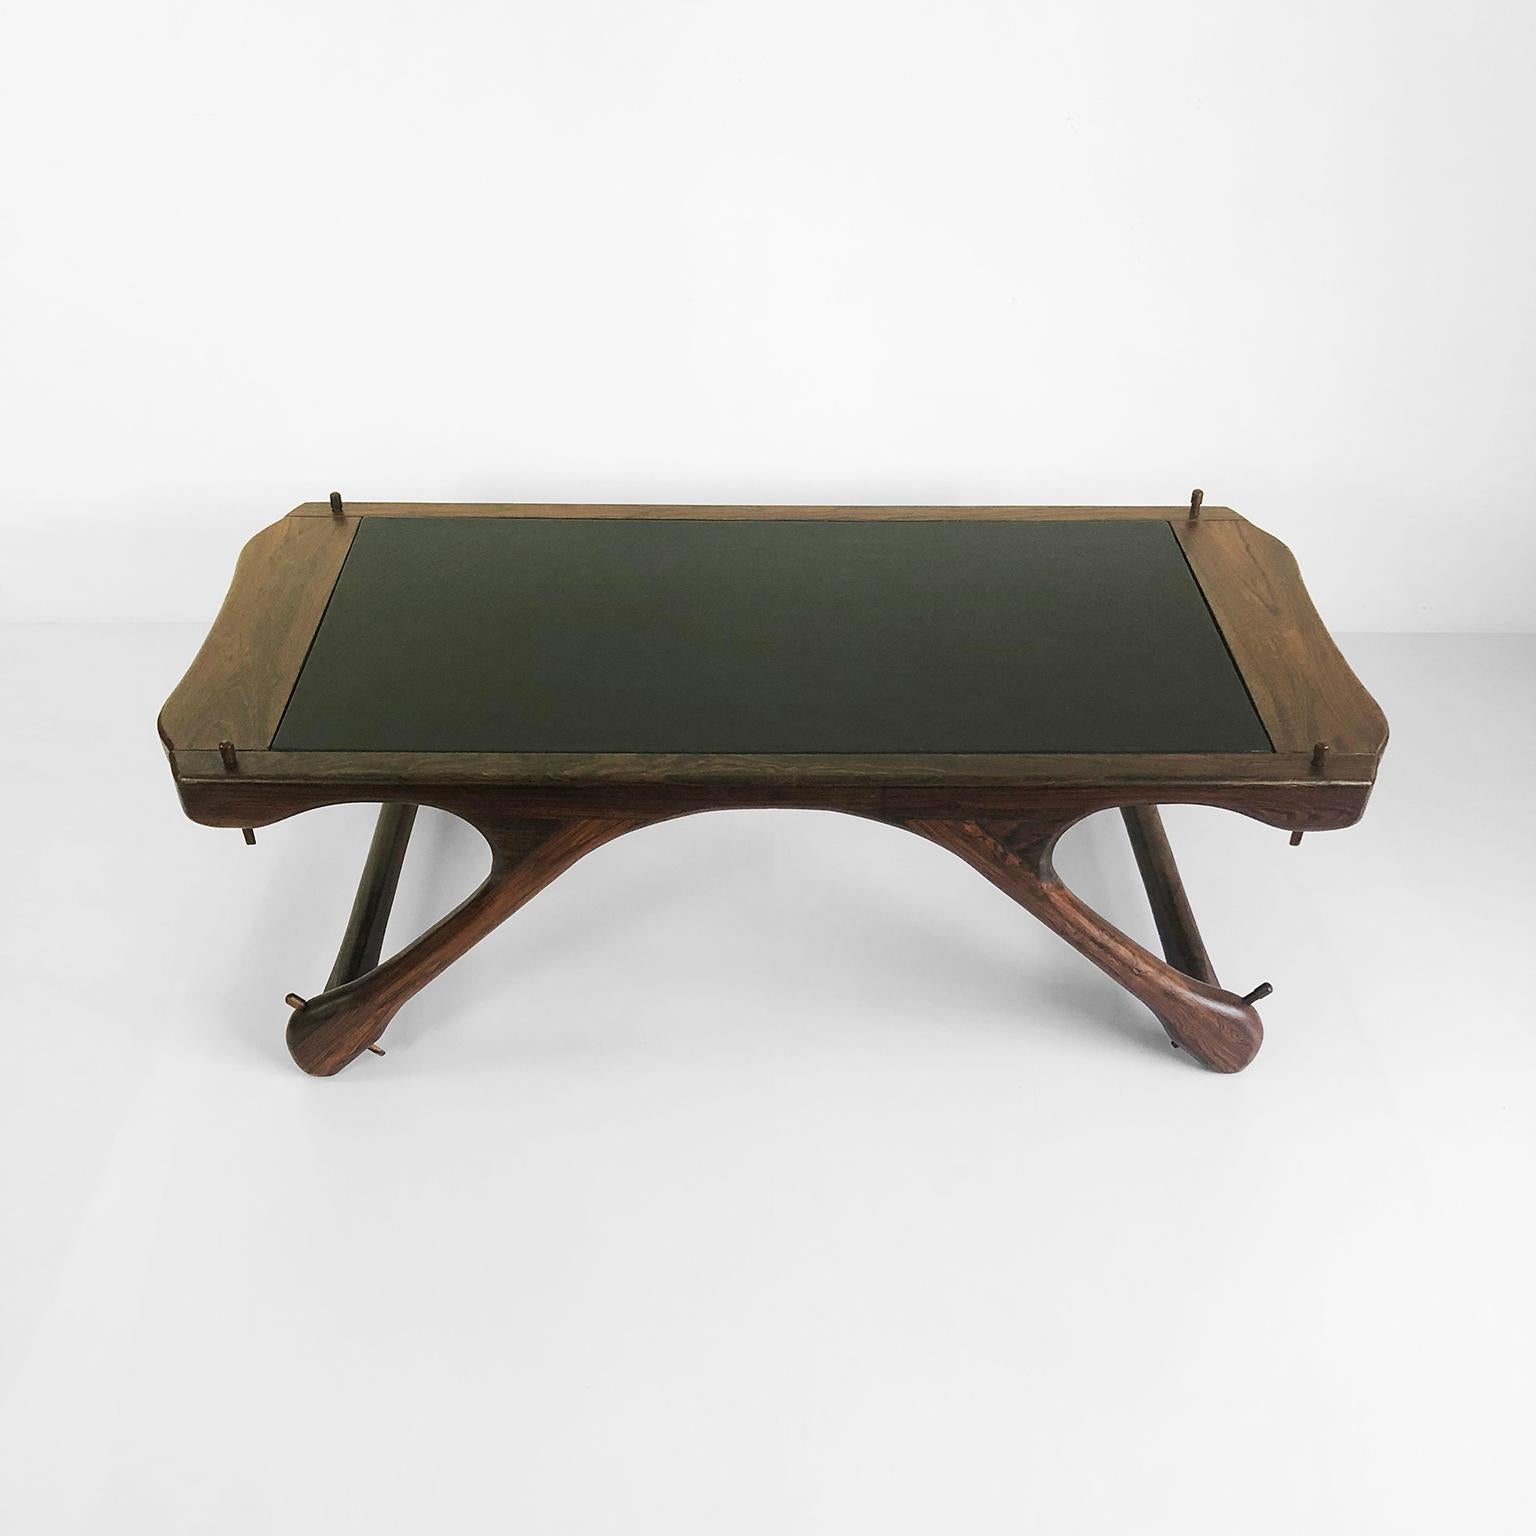 We offer this fantastic coffee table made in pieces of solid cocobolo wood with leather top designed by Don Shoemaker for Señal S.A., circa 1960

About Don Shoemaker:

Coming from an affluent family, Don was originally from Nebraska. During the